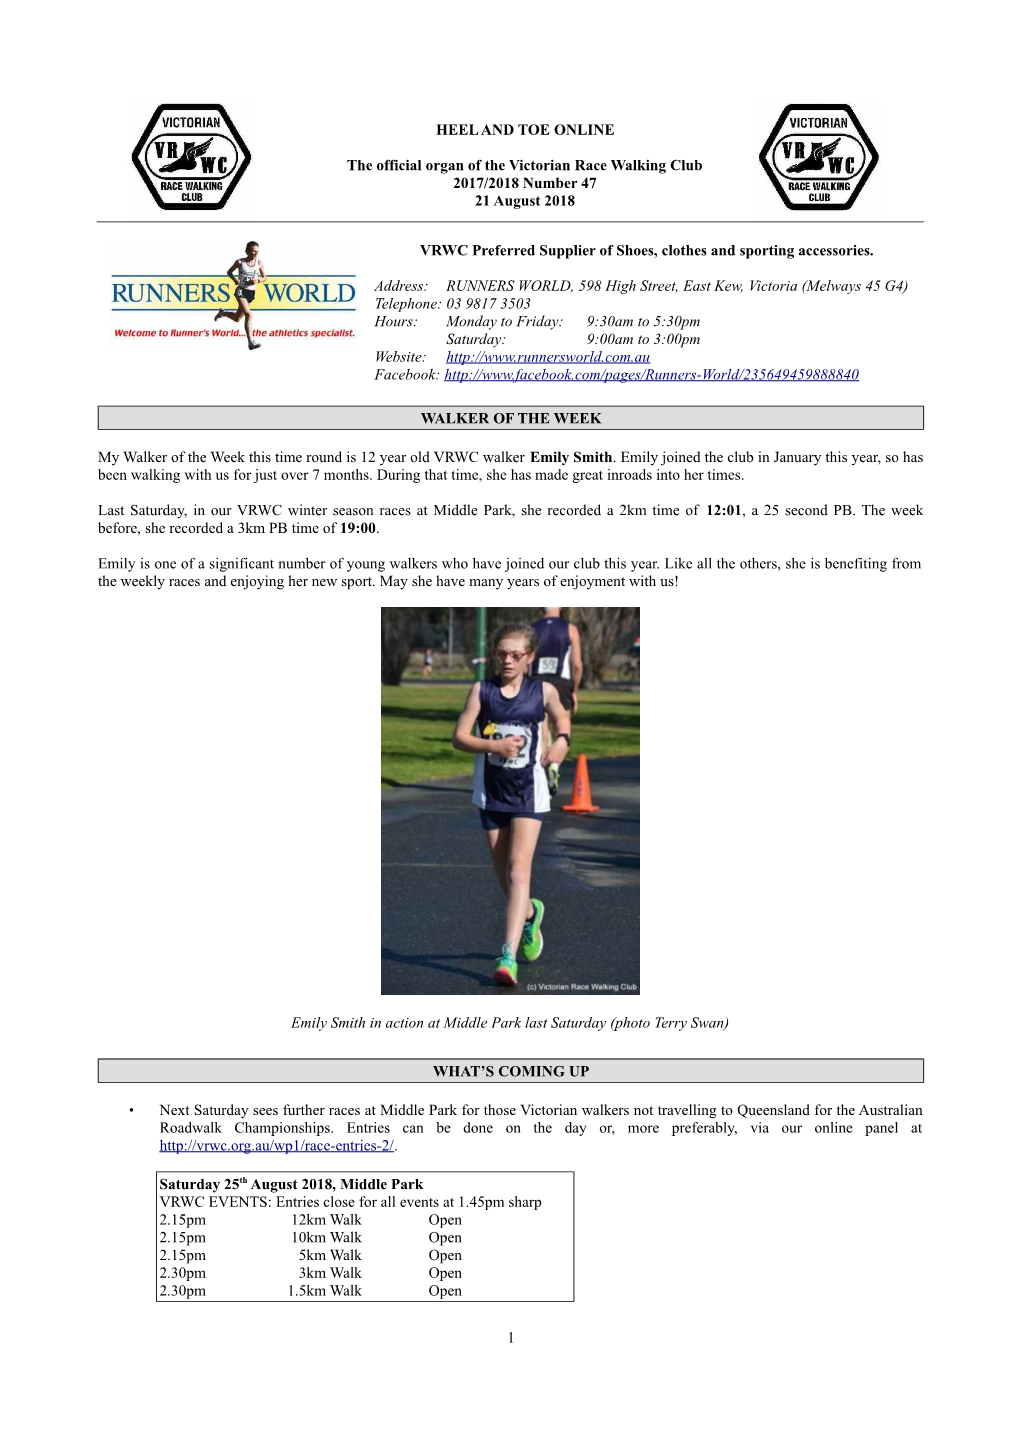 HEEL and TOE ONLINE the Official Organ of the Victorian Race Walking Club 2017/2018 Number 47 21 August 2018 VRWC Preferred Supp